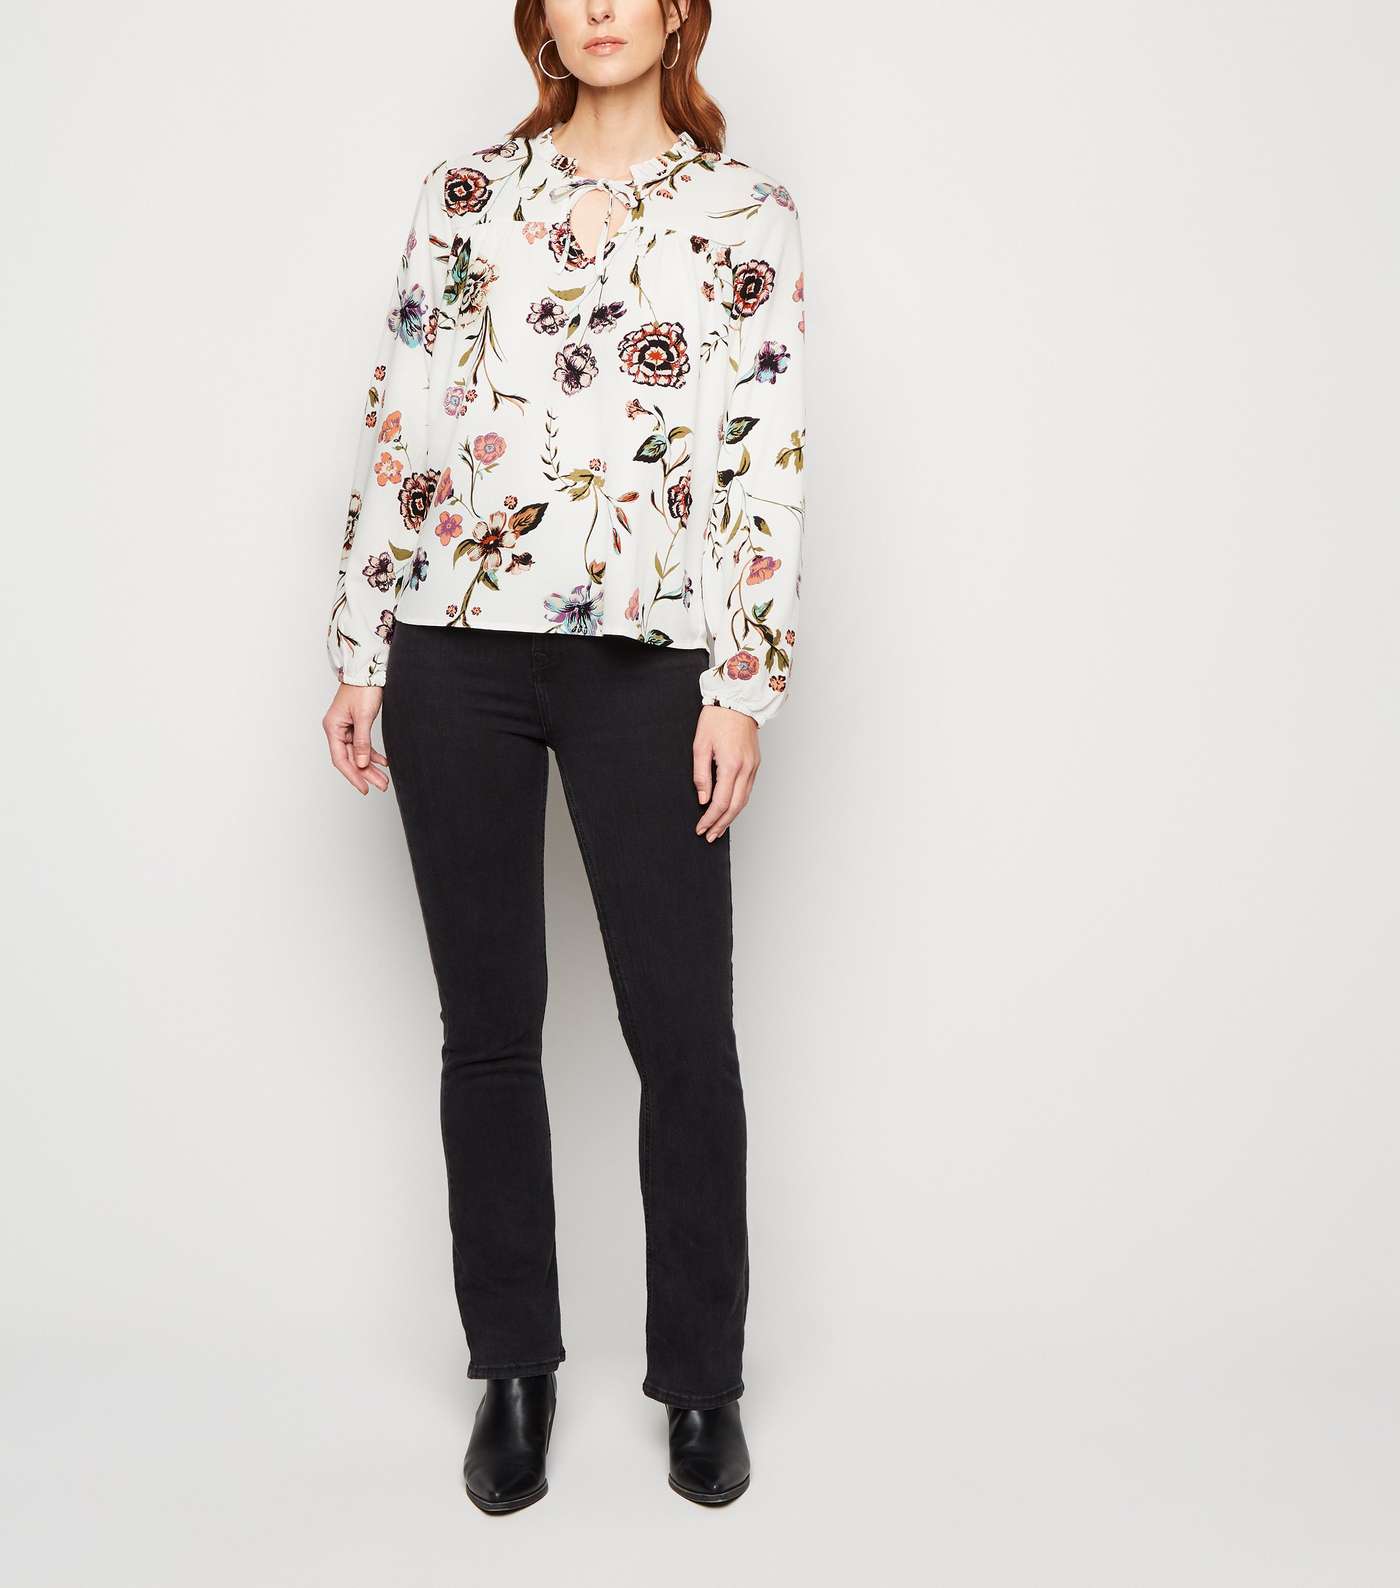 JDY White Floral Frill Neck Blouse Image 2